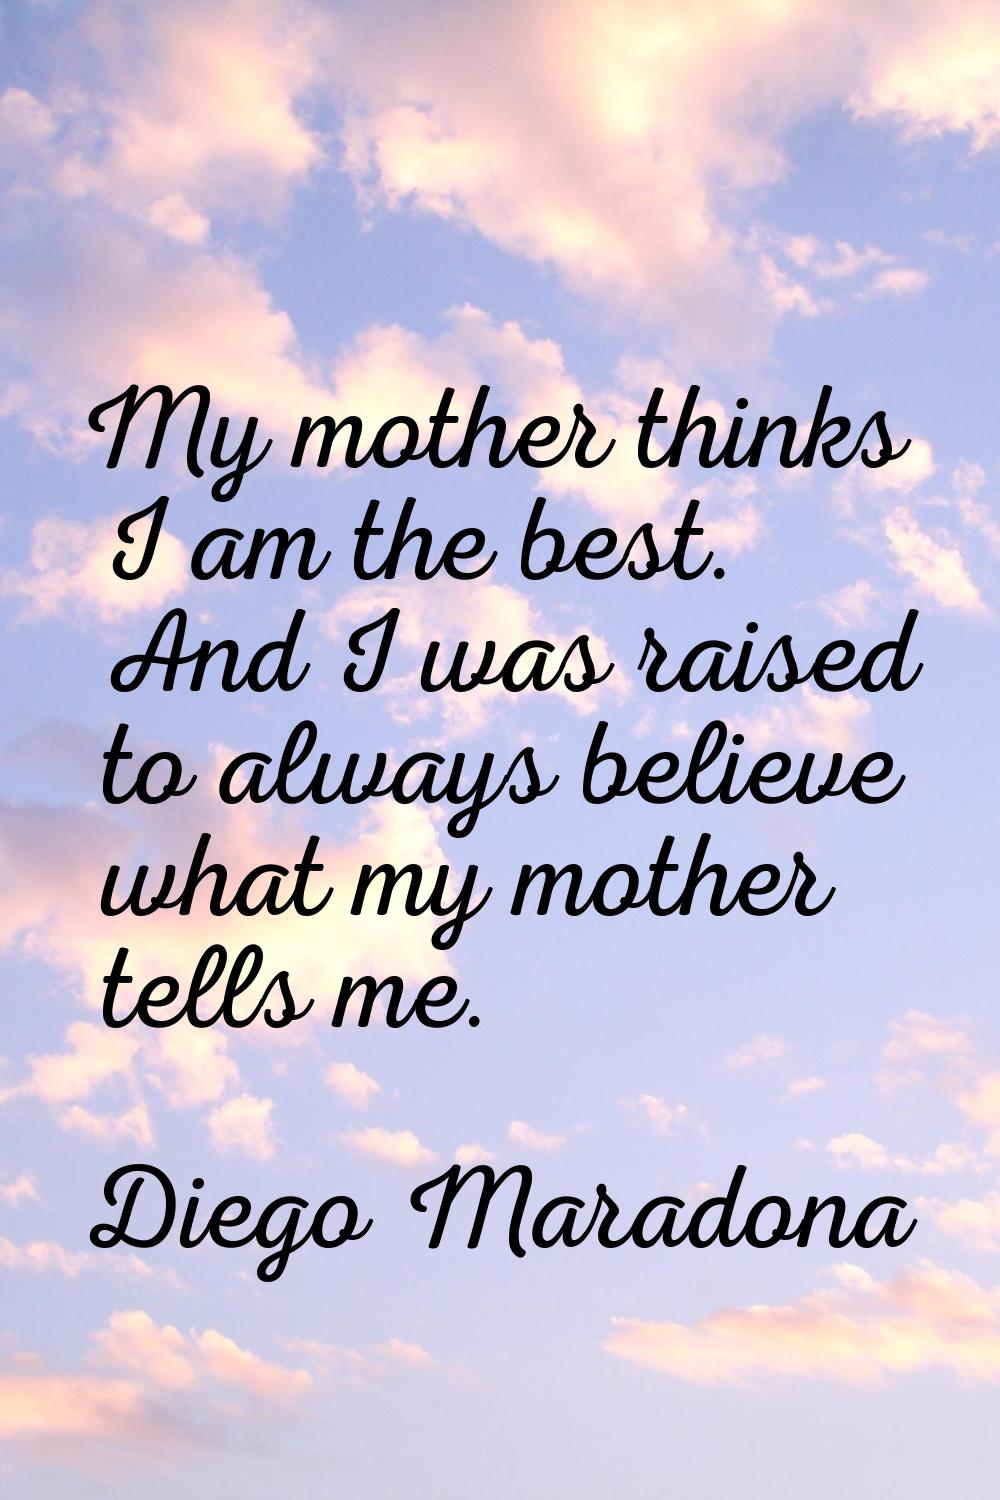 My mother thinks I am the best. And I was raised to always believe what my mother tells me.